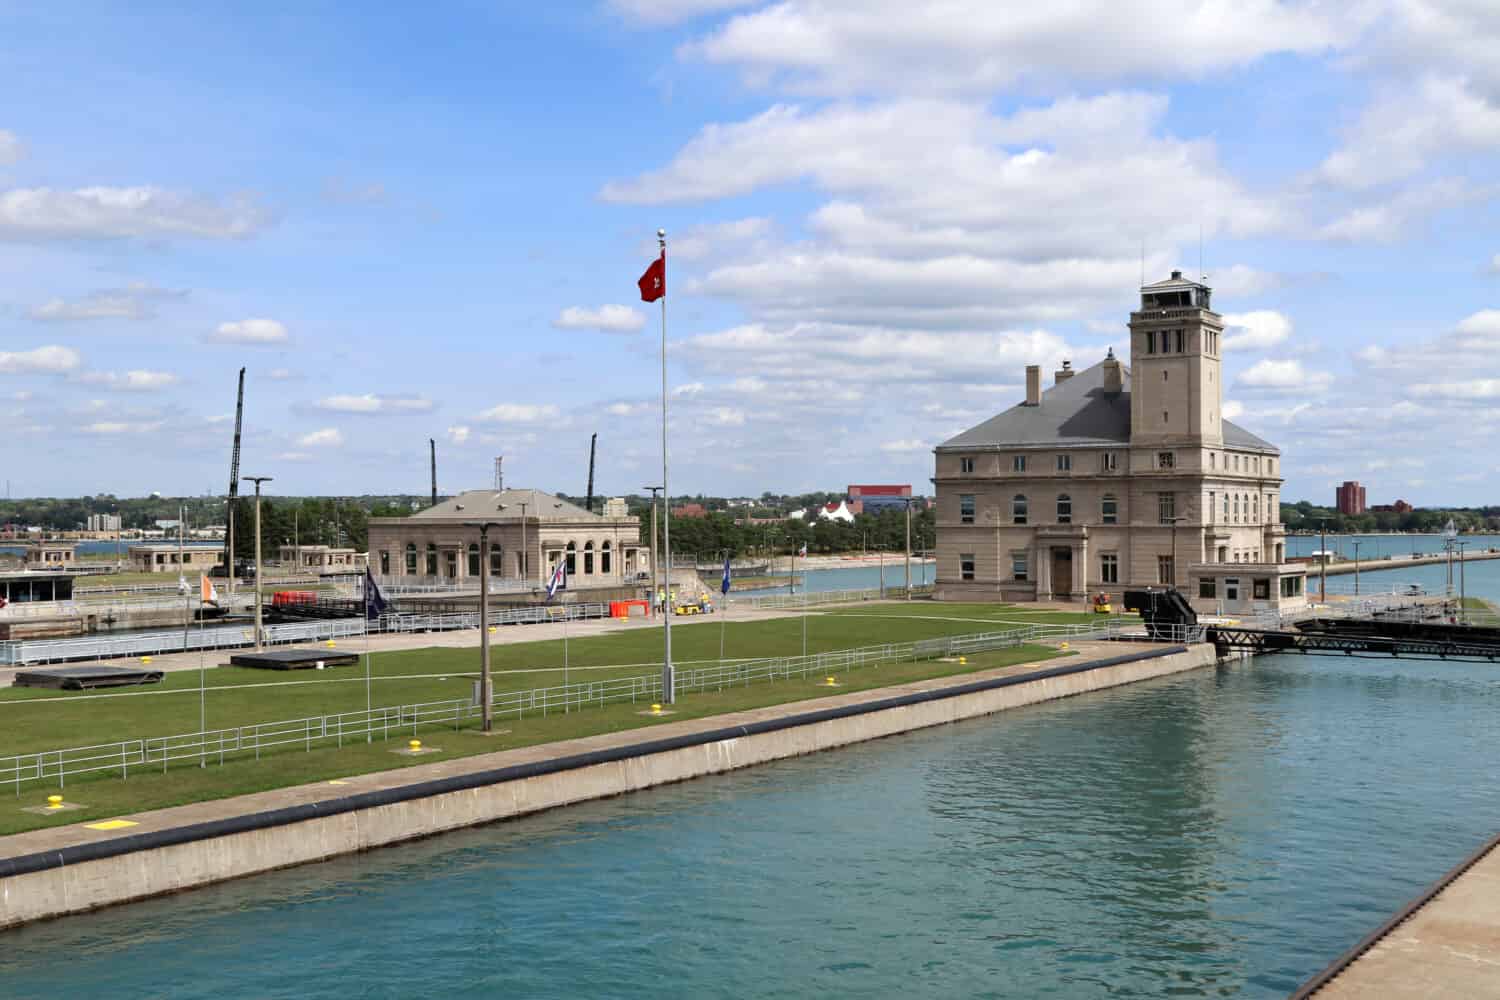 The Soo Locks, at Sault Ste Marie, Michigan is an important waterway near the Canadian border, allowing large ocean going vessels access to Lake Superior.